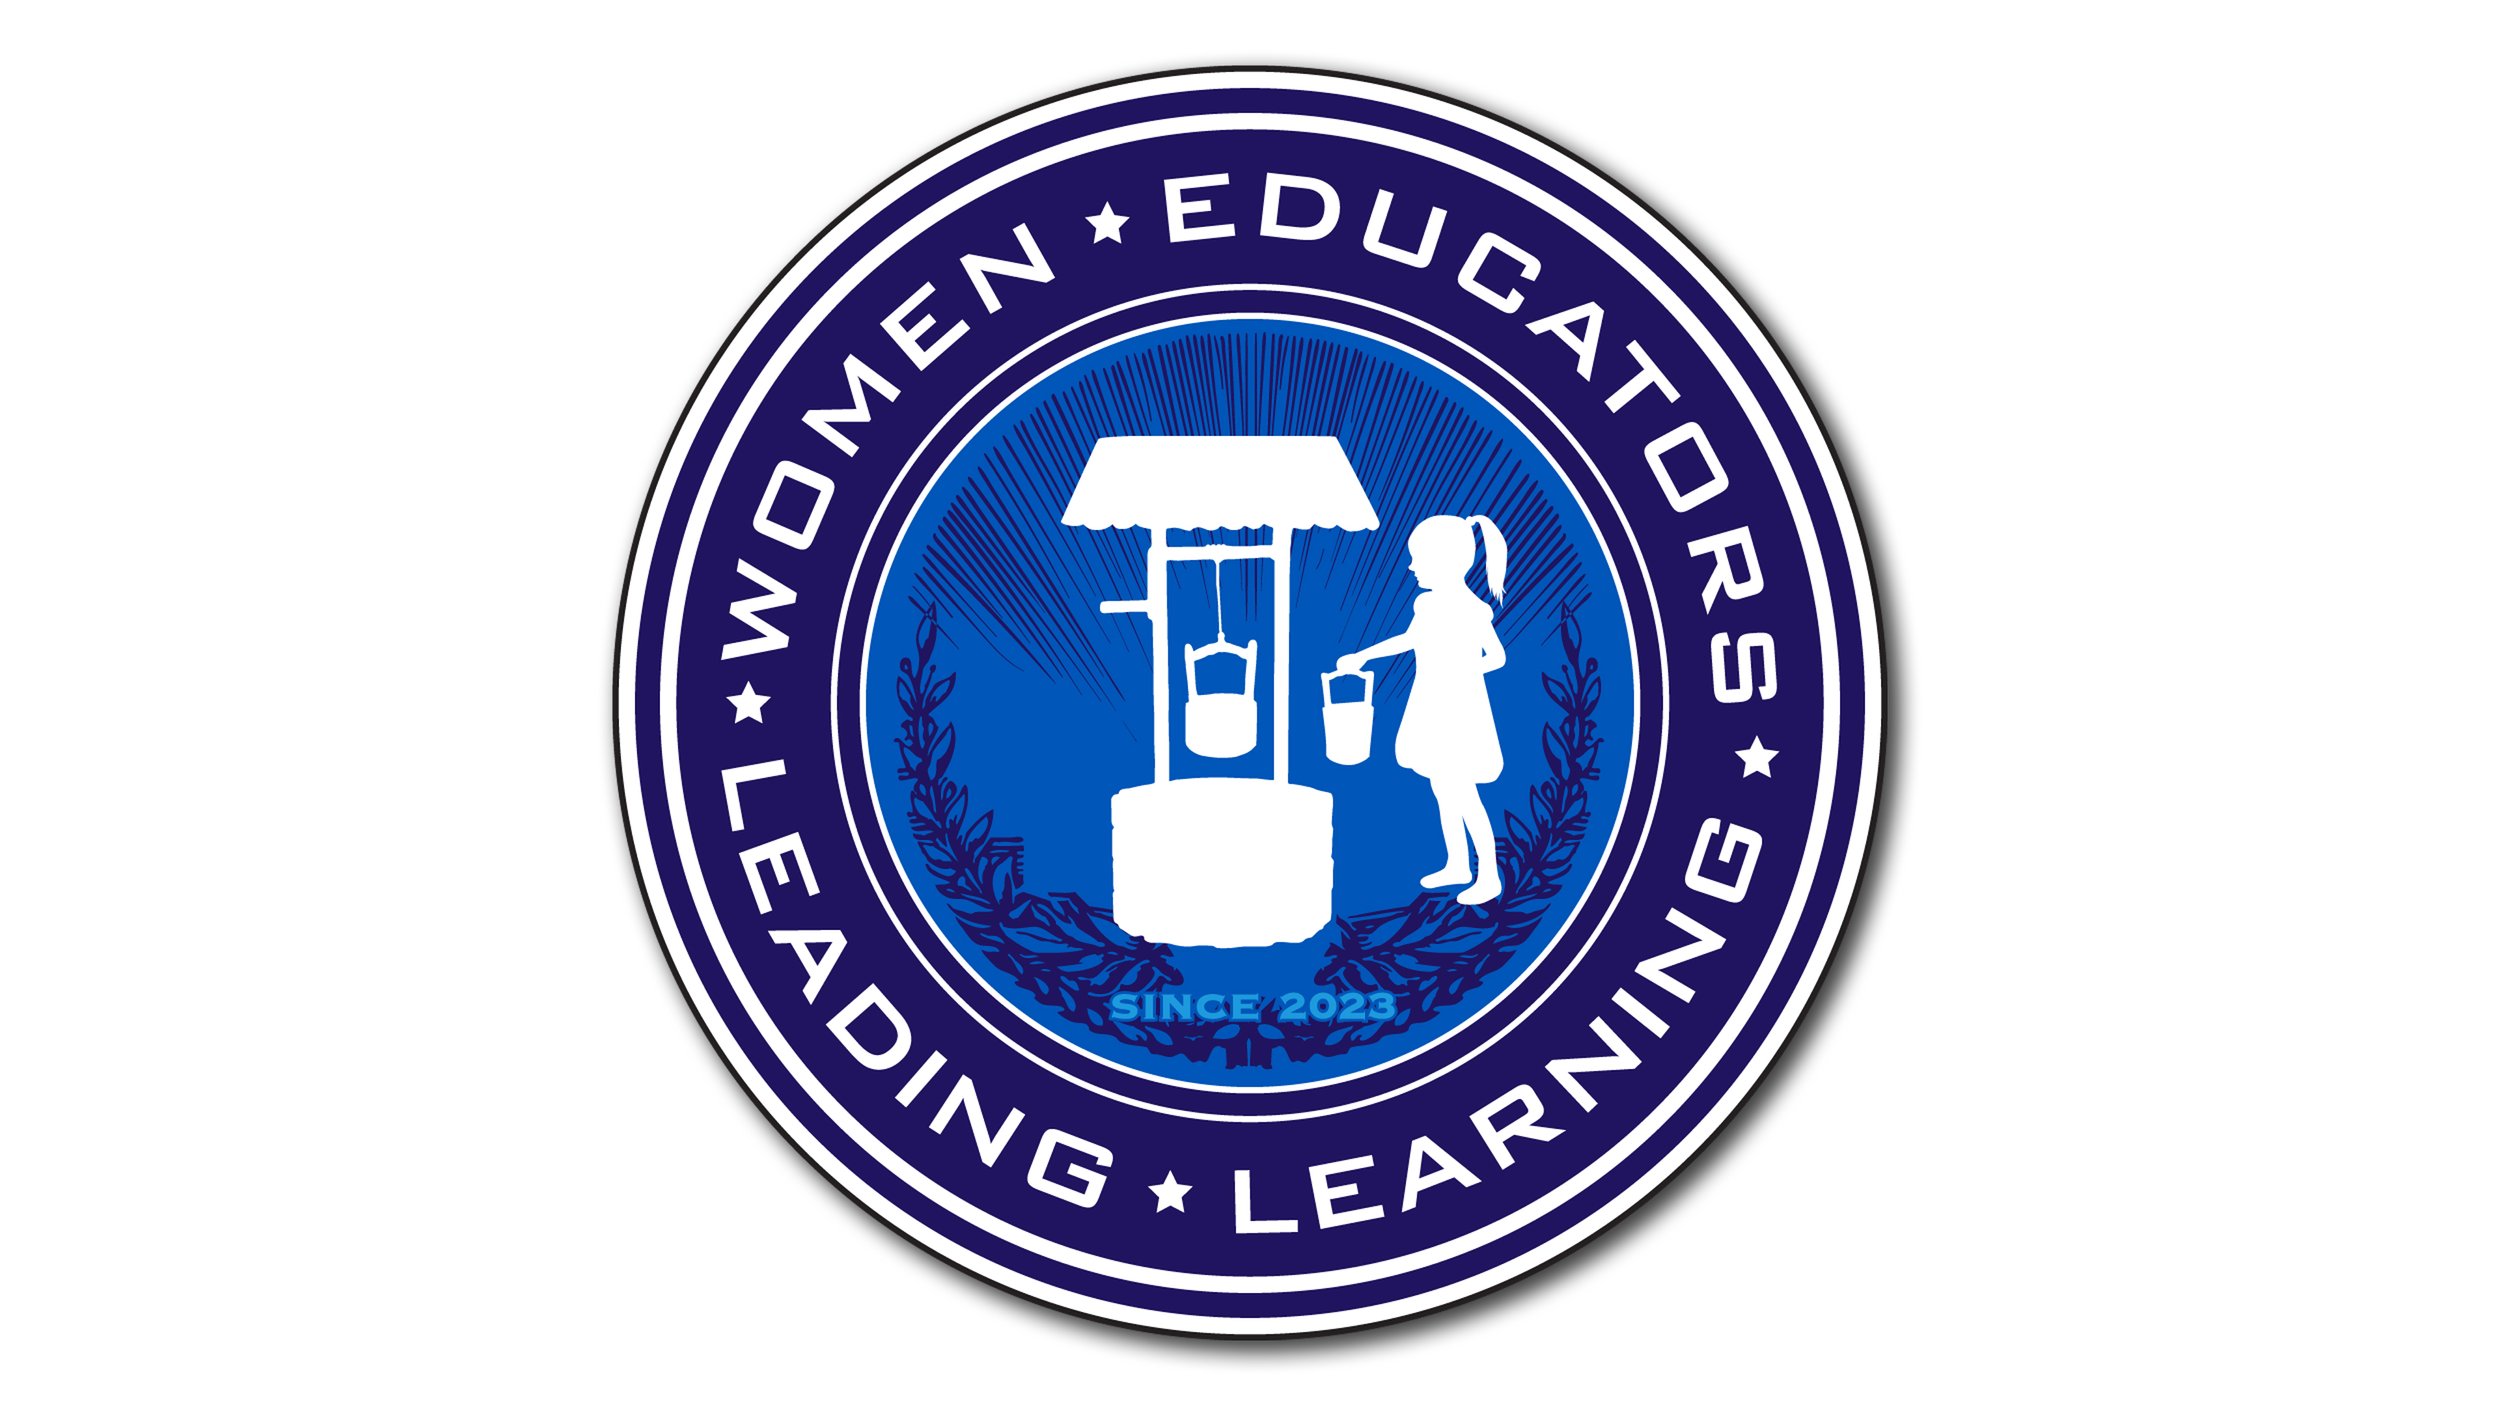 Logo and Visual Identity -- designed and illustrated by SP STUDIOS, for WELL - Women Educators Leading Learning, New England.